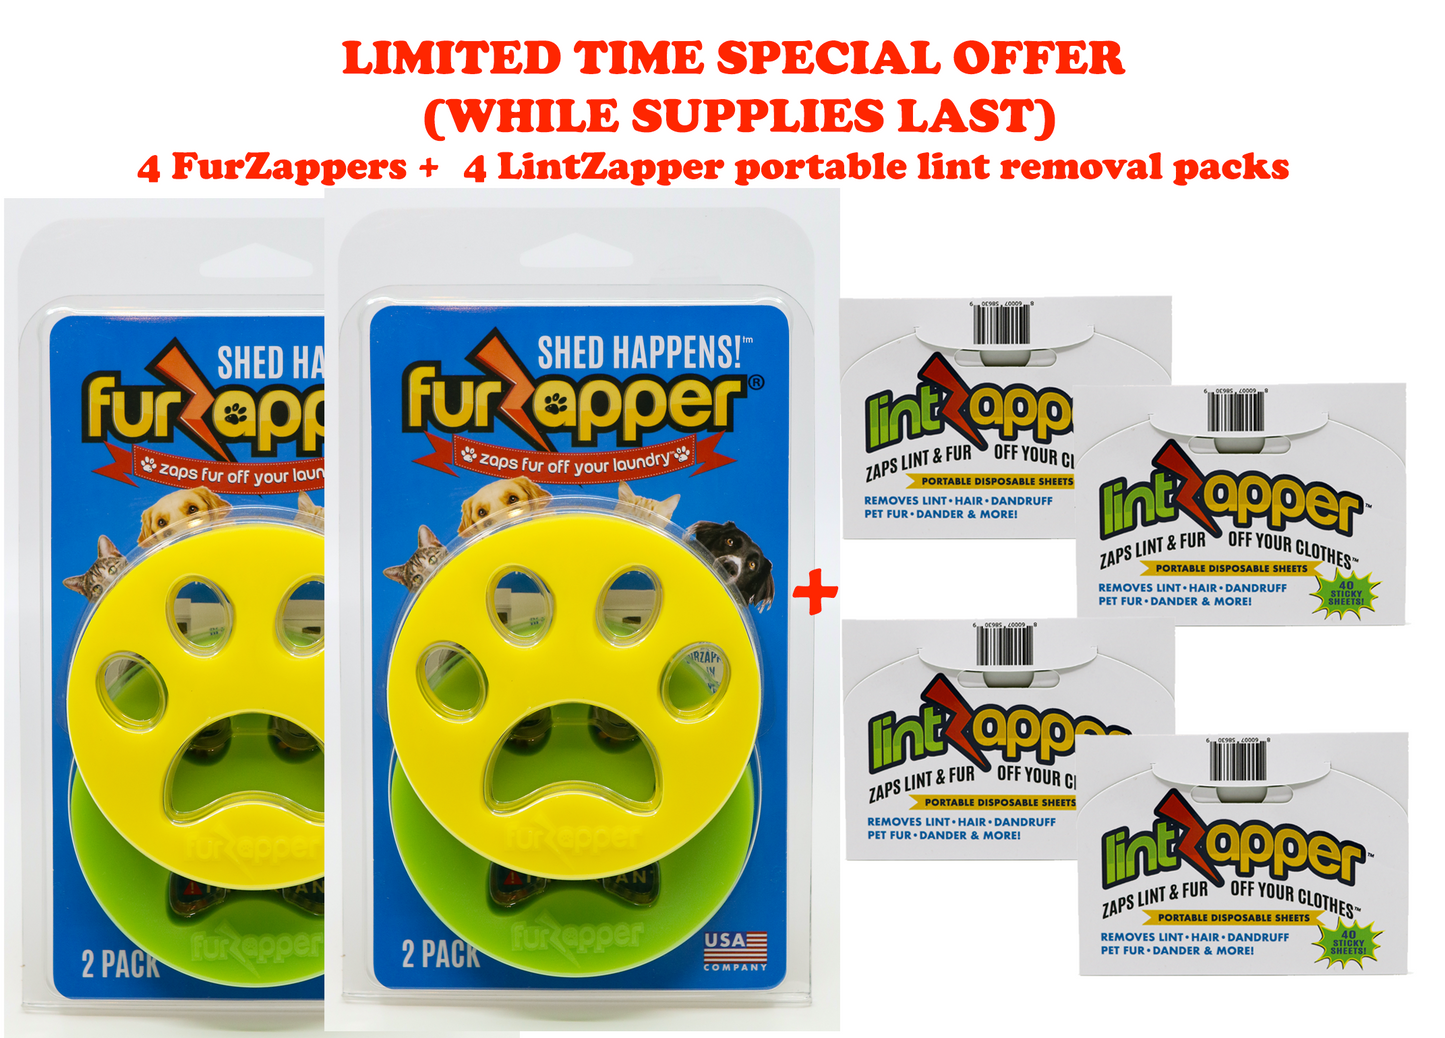 Special Edition Bundle (Limited Time) 4 FurZappers/ 4 LintZappers